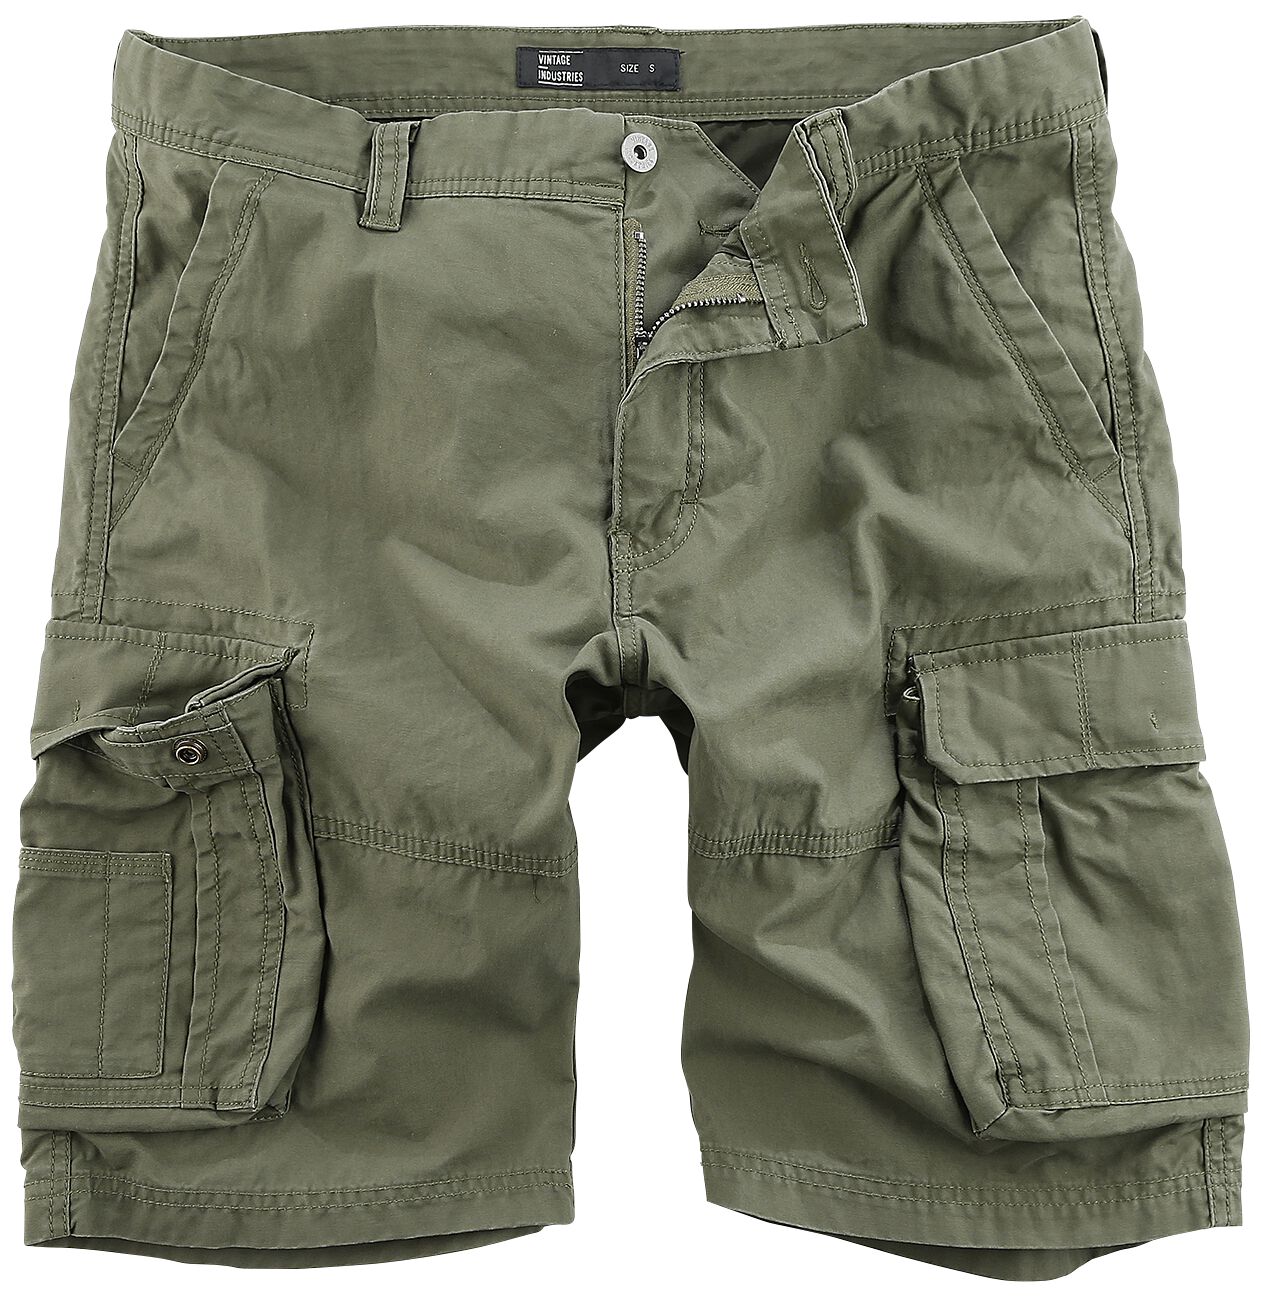 Image of Shorts di Vintage Industries - Rowing Short - S a 3XL - Uomo - verde oliva